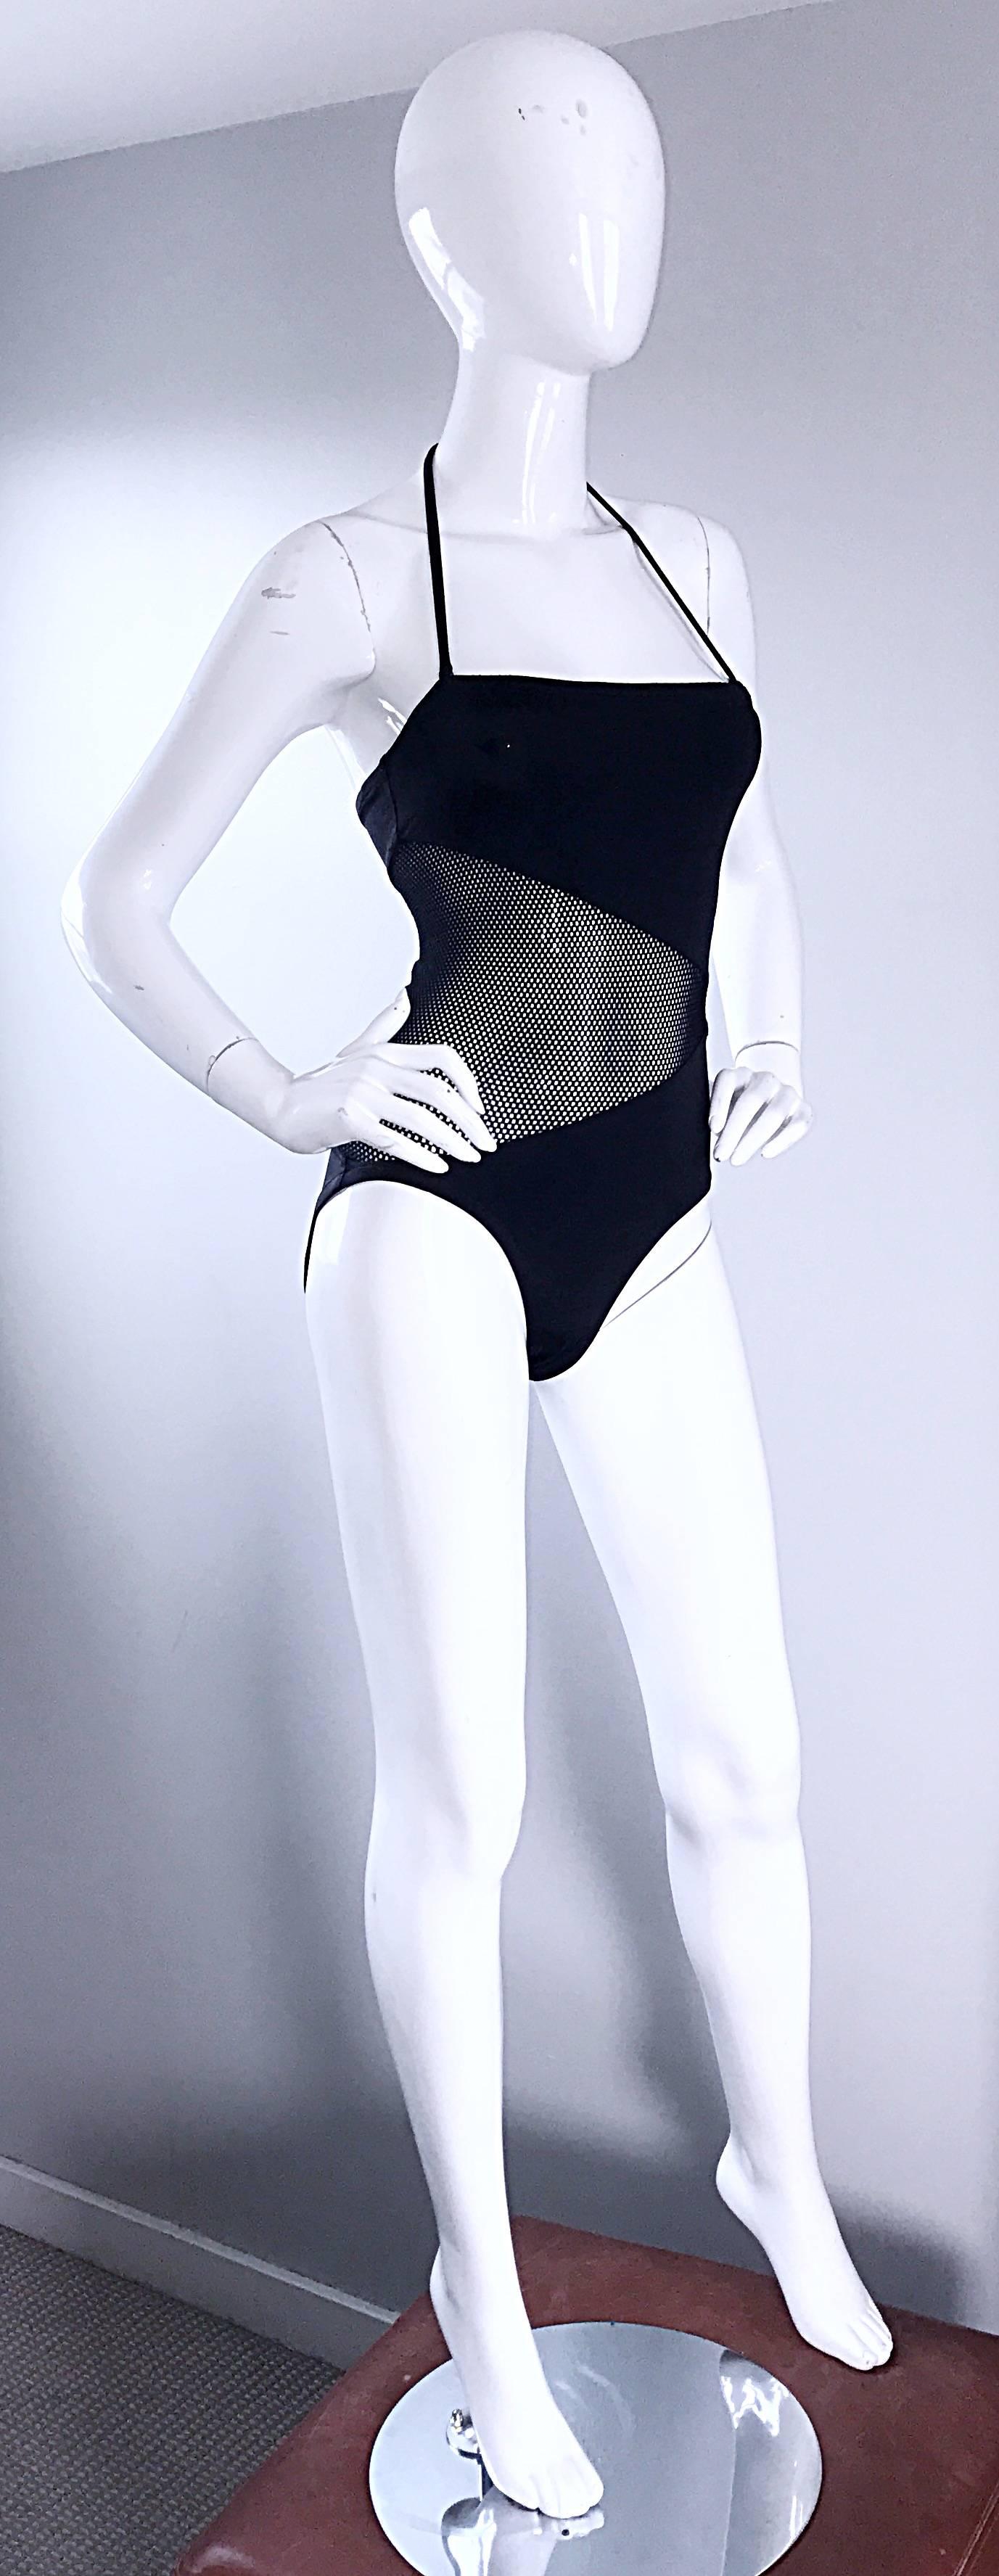 Bill Blass Black Cutout Mesh Halter Swimsuit Bodysuit, 1990s In Excellent Condition For Sale In San Diego, CA